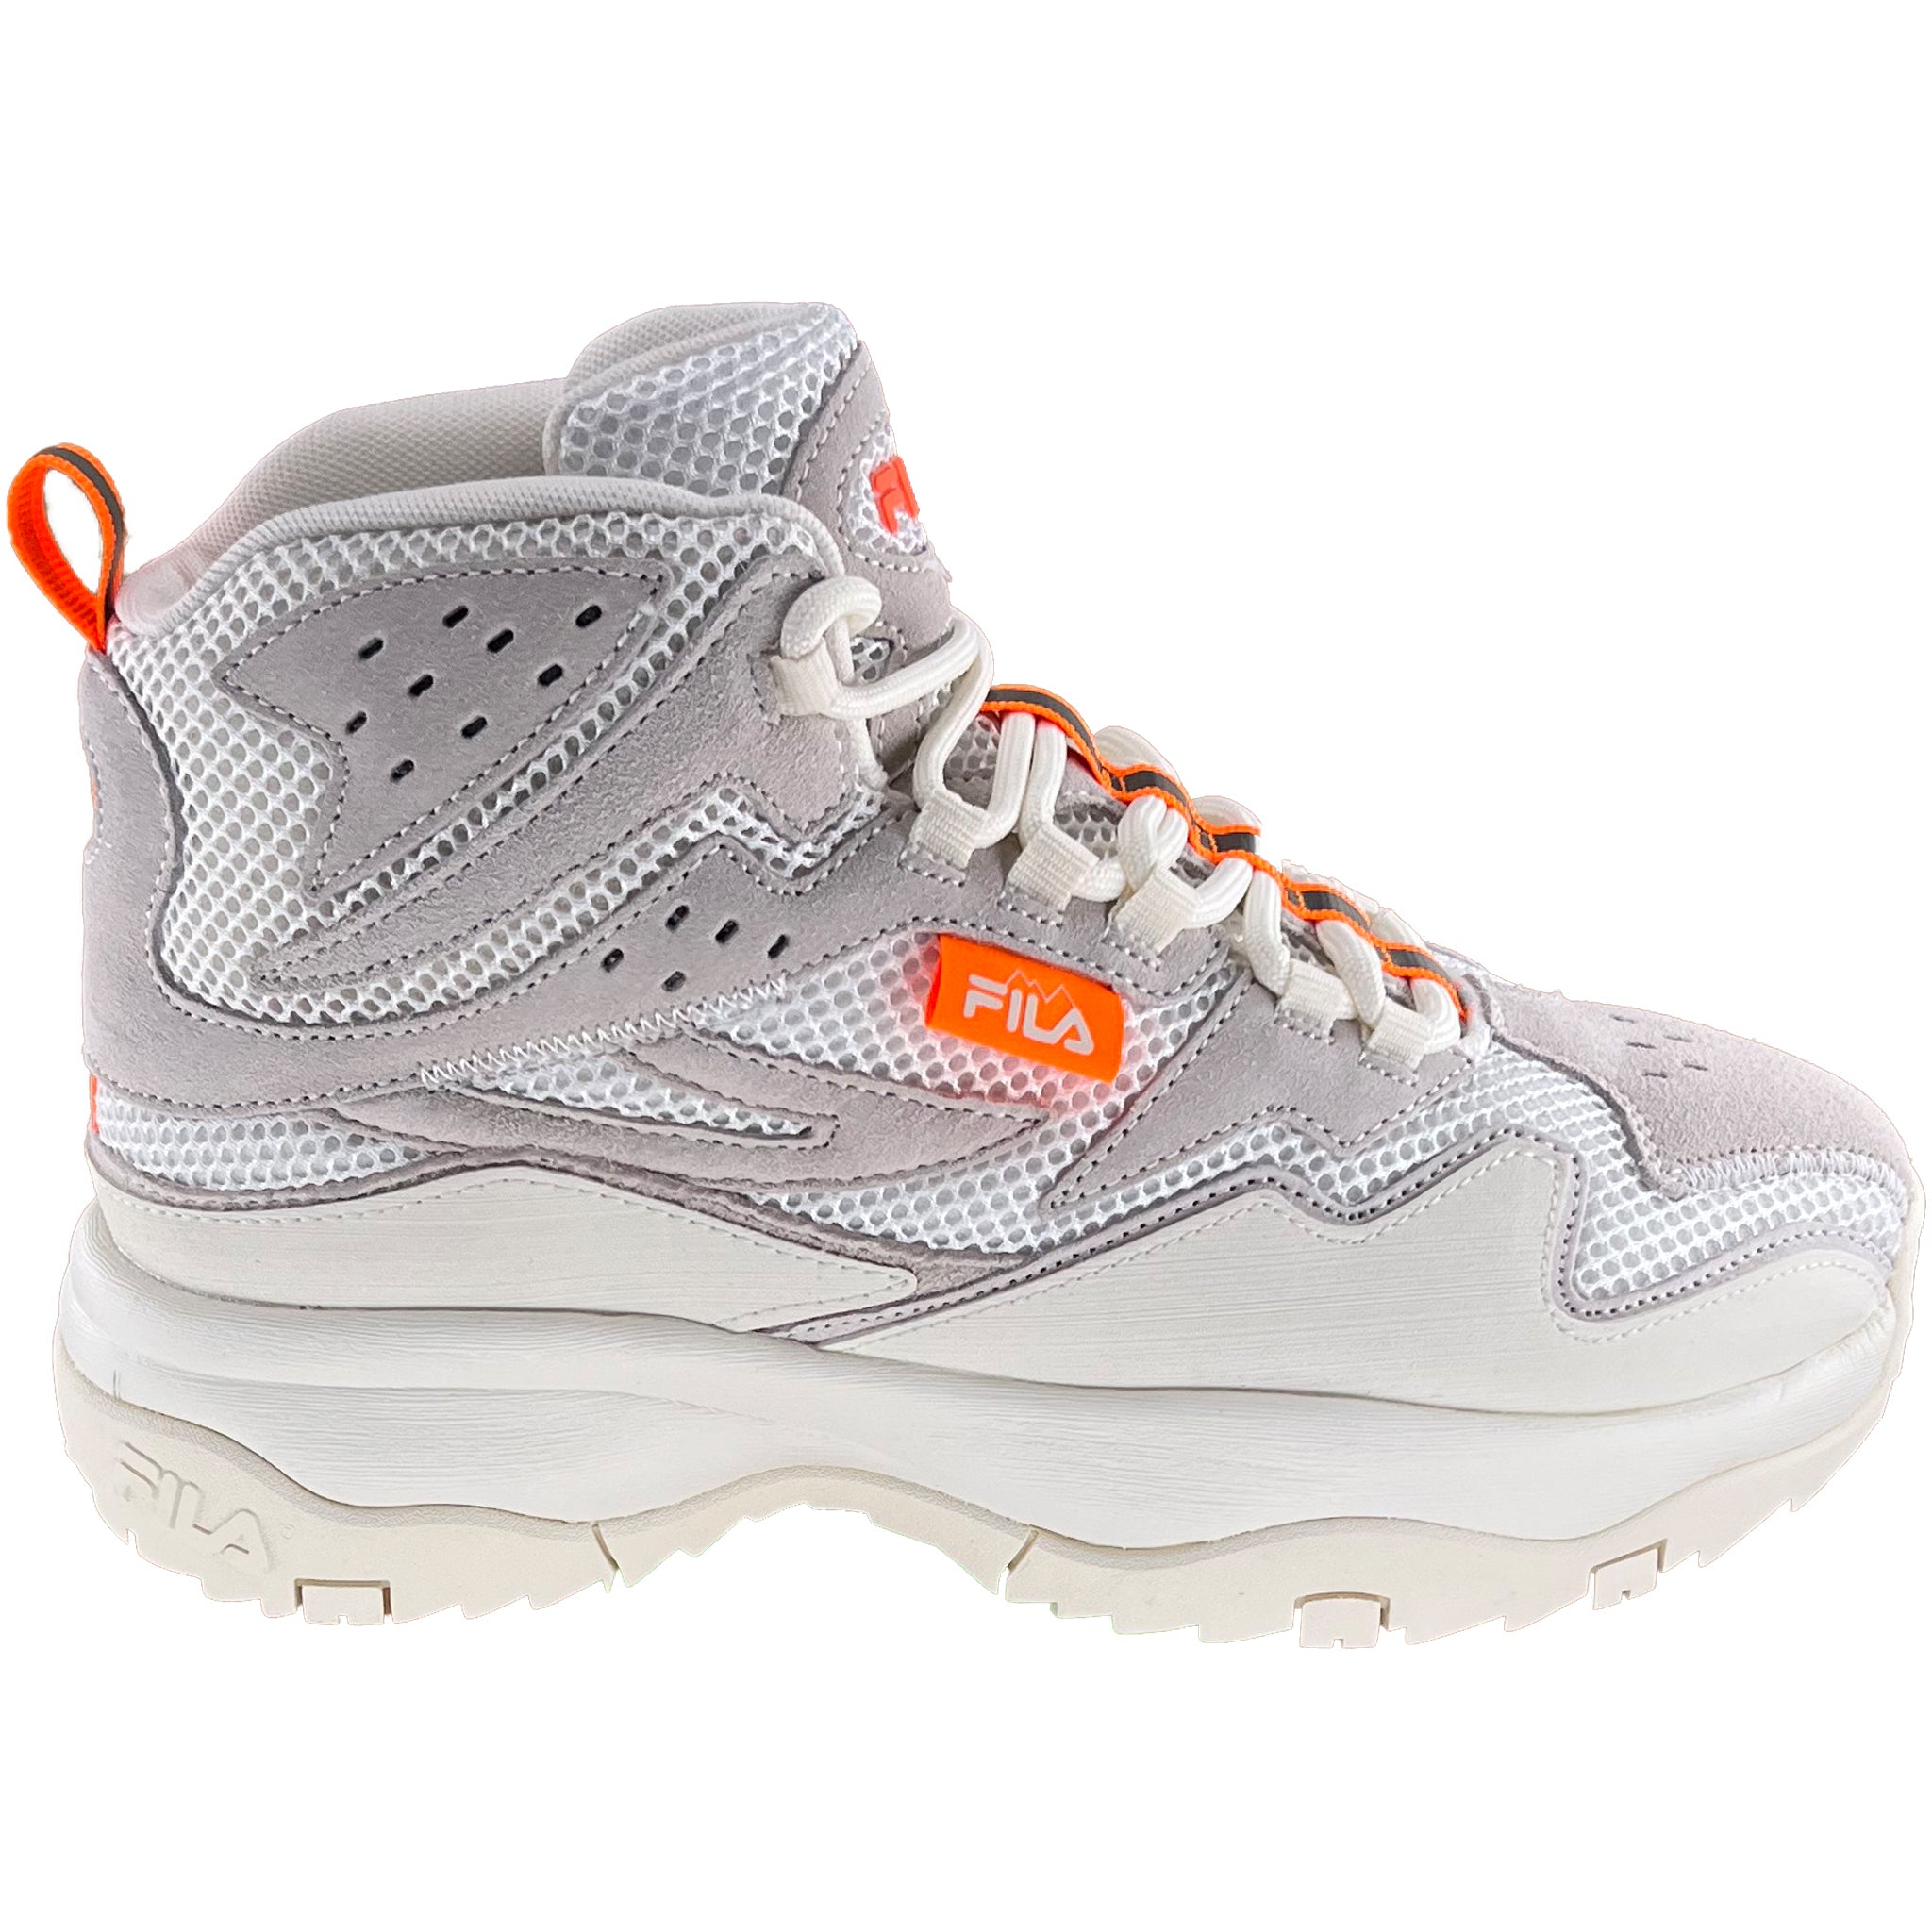 Fila Interation sneakers in cream and leopard print with gum sole | ASOS